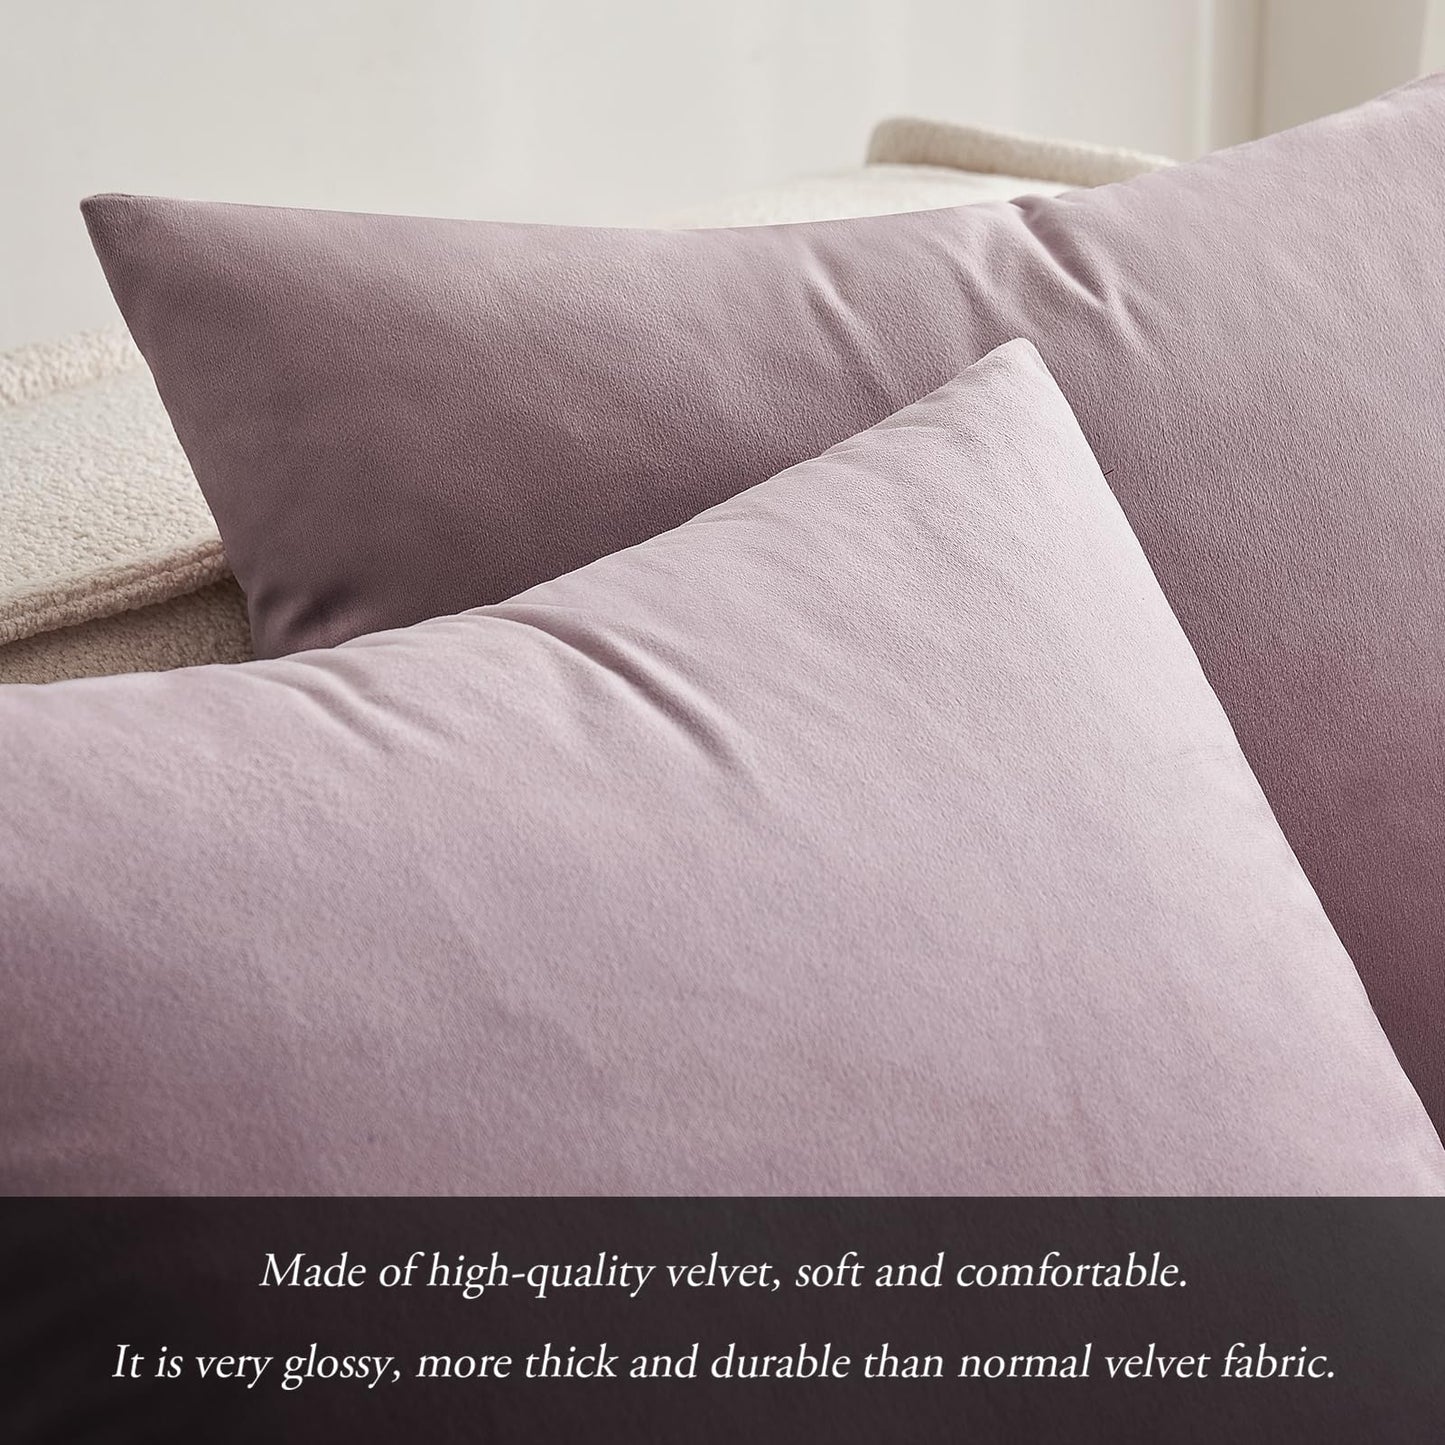 MIULEE Pack of 2, Velvet Soft Solid Decorative Square Throw Pillow Covers Set Cushion Cases Pillowcases for Spring Sofa Bedroom Car18x18 Inch 45x45 cm